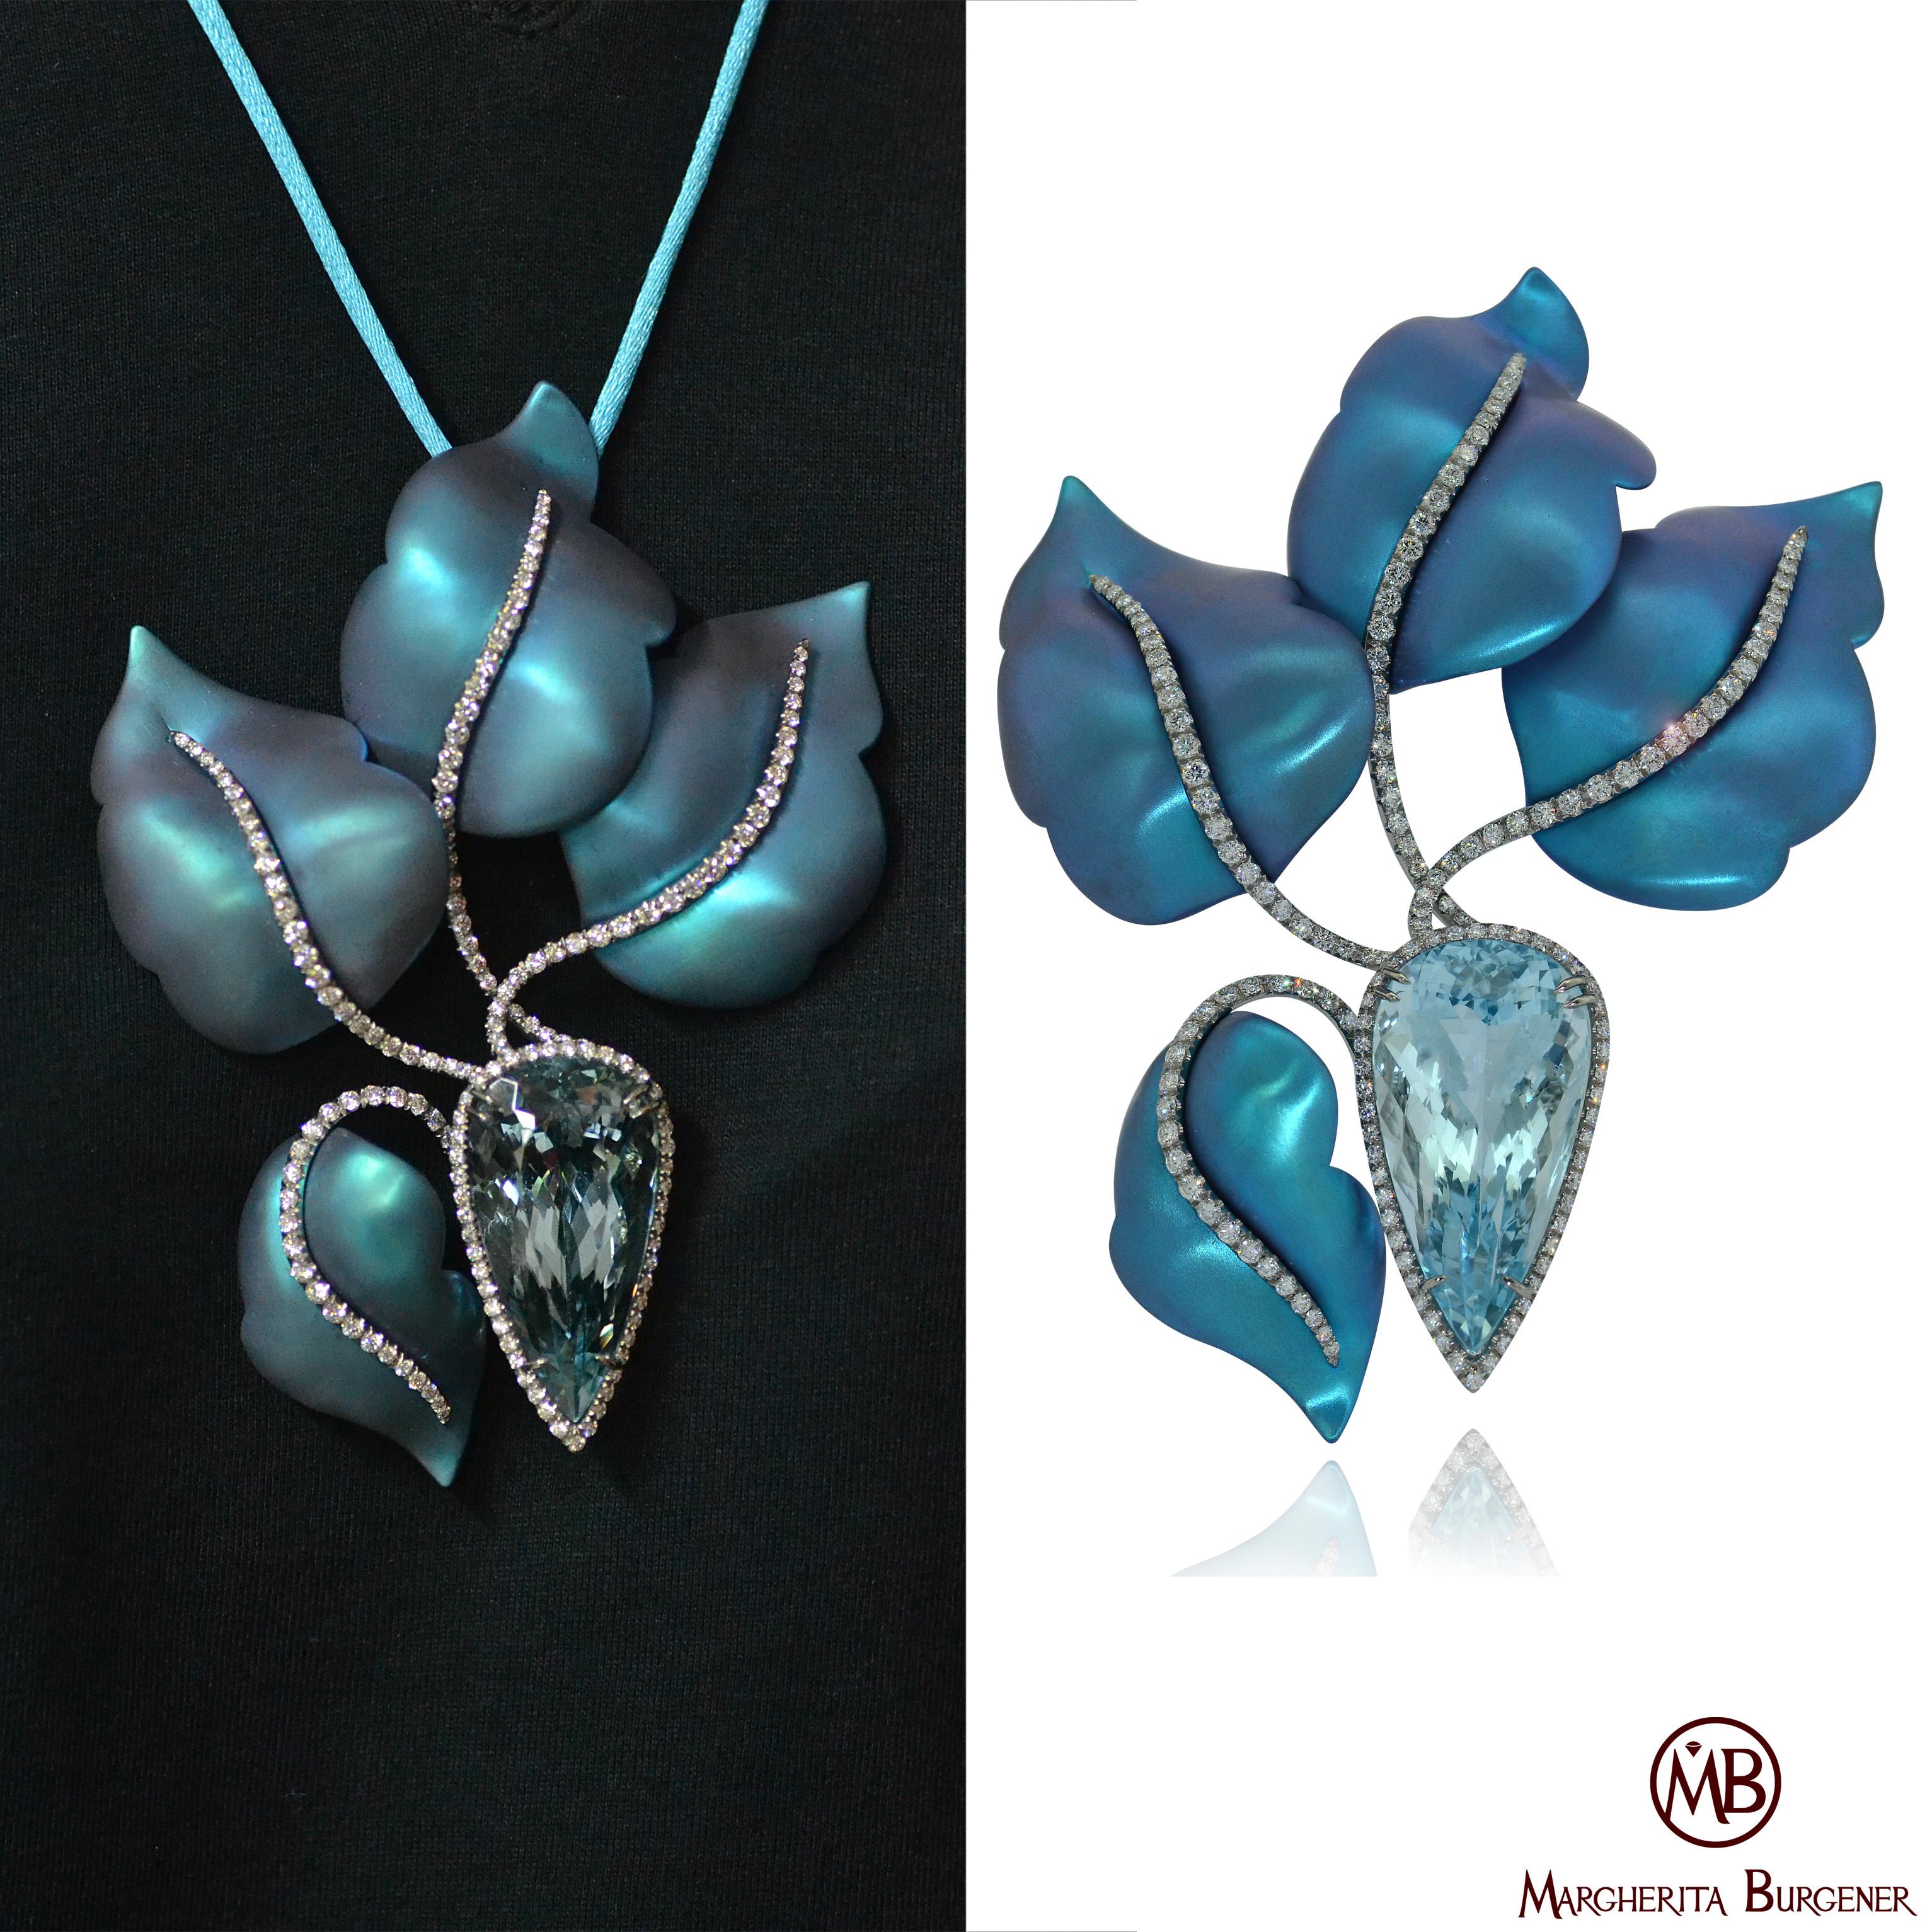 Impressive, unique, stunning  pendant and brooch.
Made in Italy in Margherita Burgener family workshop, the brooch that is also wearable as a pendant, is very light as fully in titanium.
Petals are oxydised in a velvet like petroleum blue.
The